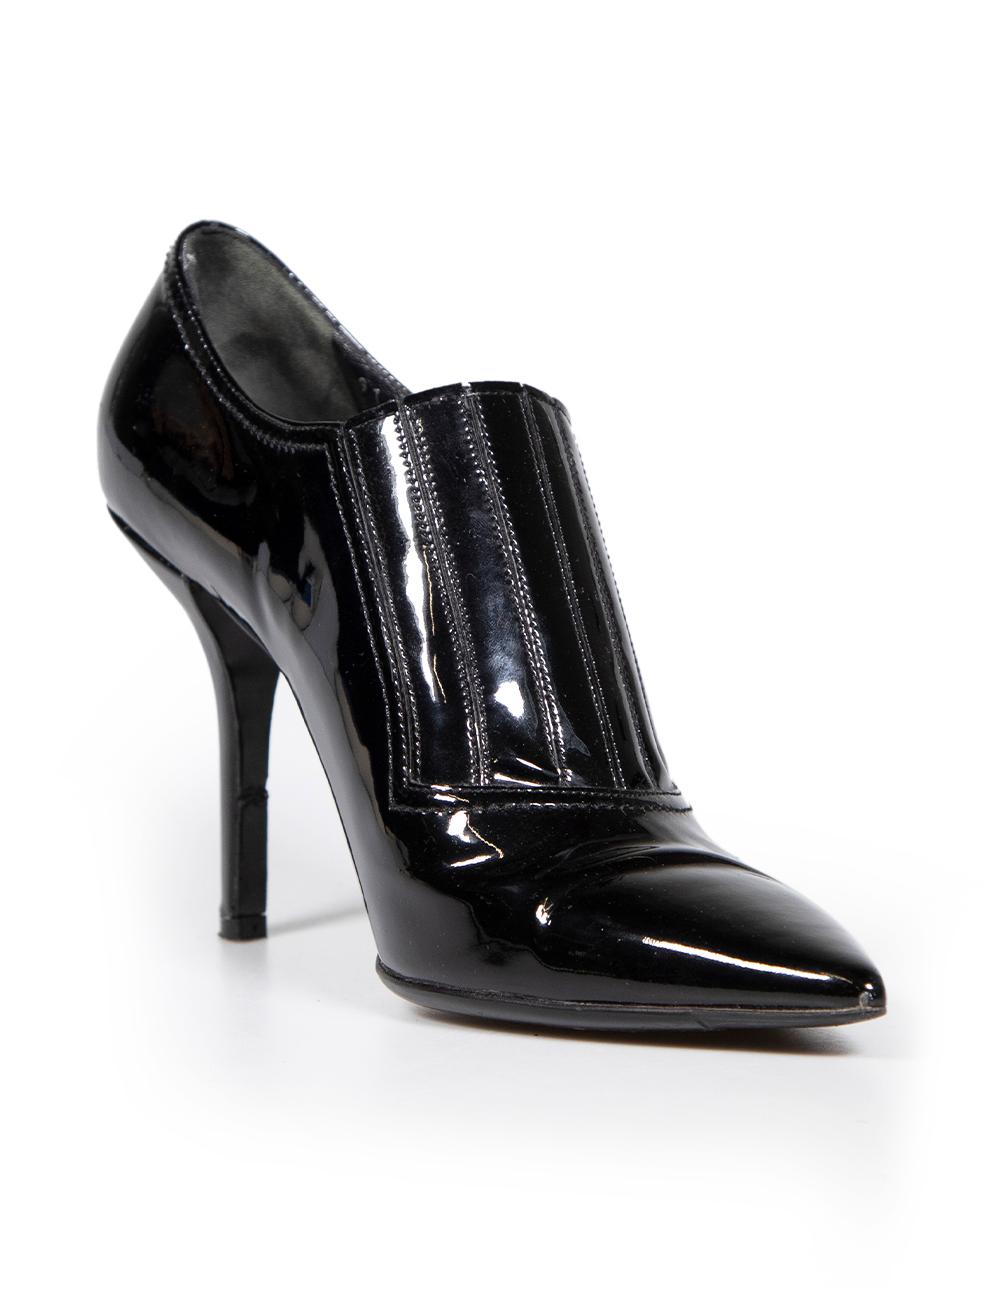 CONDITION is Very good. Minimal wear to shoes is evident. Minimal wear to both shoe toes and left sides with abrasions to the leather on this used Valentino designer resale item.
 
 Details
 Black
 Patent leather
 Heels
 Point toe
 High heeled
